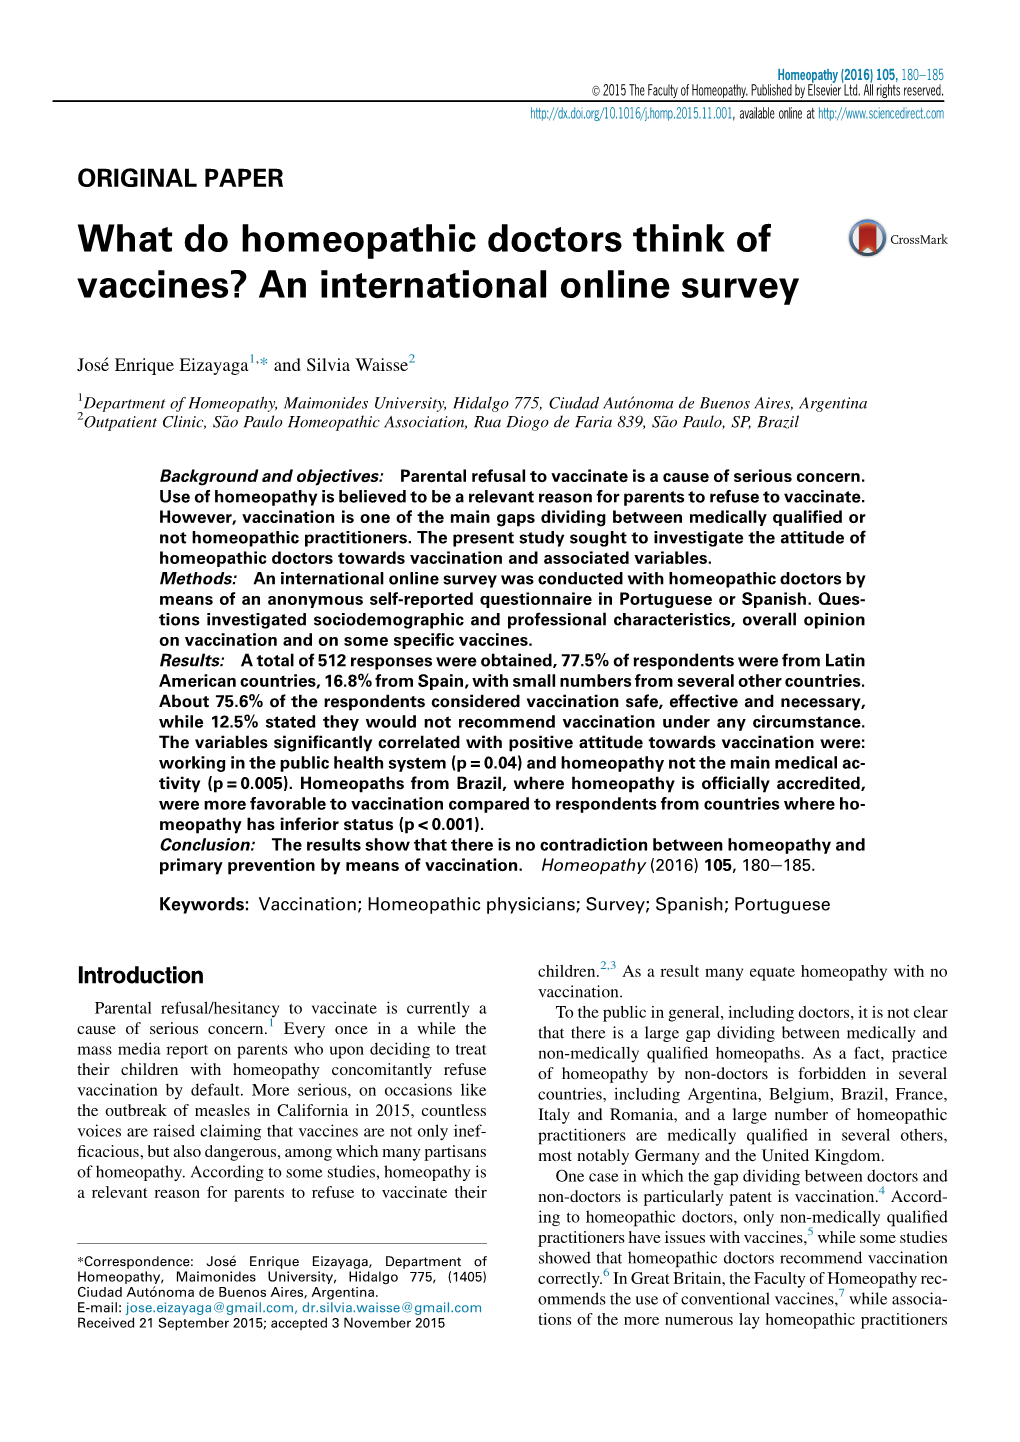 What Do Homeopathic Doctors Think of Vaccines? an International Online Survey